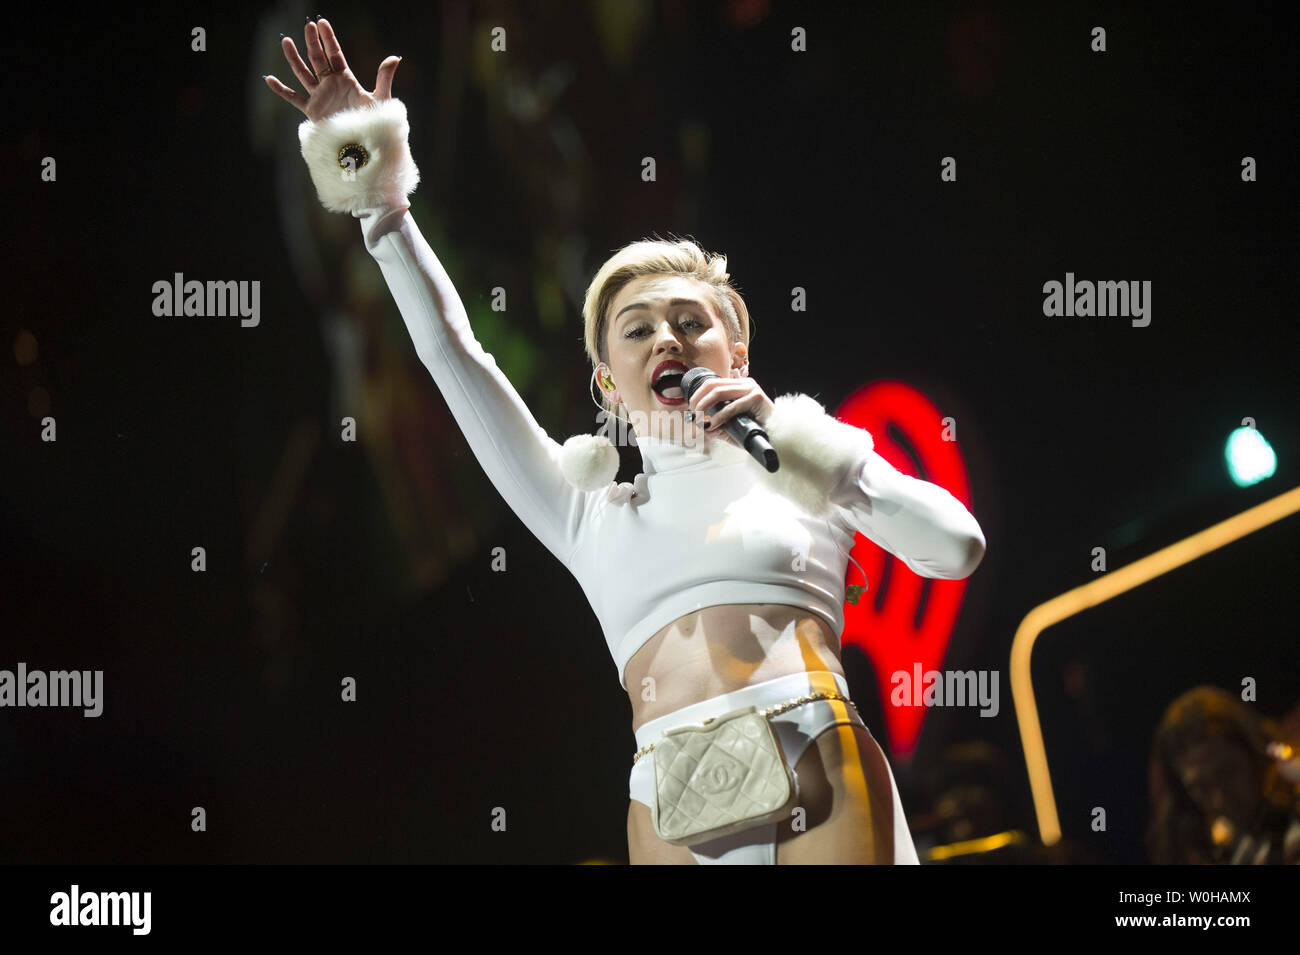 Miley Cyrus performs during the Hot 99.5 Jingle Ball concert at the Verizon Center in Washington, D.C. on December 16, 2013.  UPI/Kevin Dietsch Stock Photo